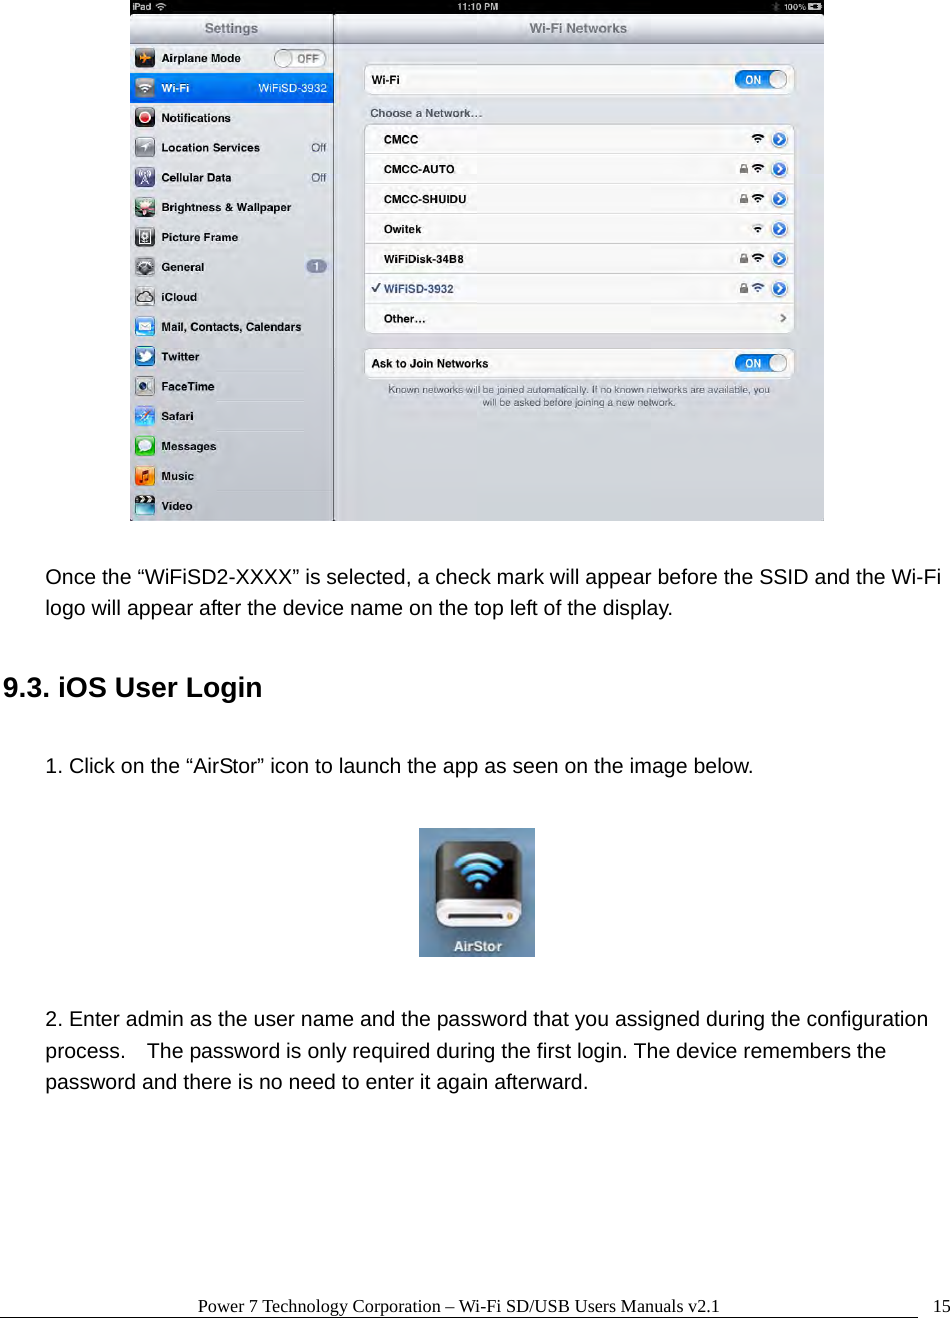 Power 7 Technology Corporation – Wi-Fi SD/USB Users Manuals v2.1  15   Once the “WiFiSD2-XXXX” is selected, a check mark will appear before the SSID and the Wi-Fi logo will appear after the device name on the top left of the display.  9.3. iOS User Login  1. Click on the “AirStor” icon to launch the app as seen on the image below.    2. Enter admin as the user name and the password that you assigned during the configuration process.    The password is only required during the first login. The device remembers the password and there is no need to enter it again afterward.  